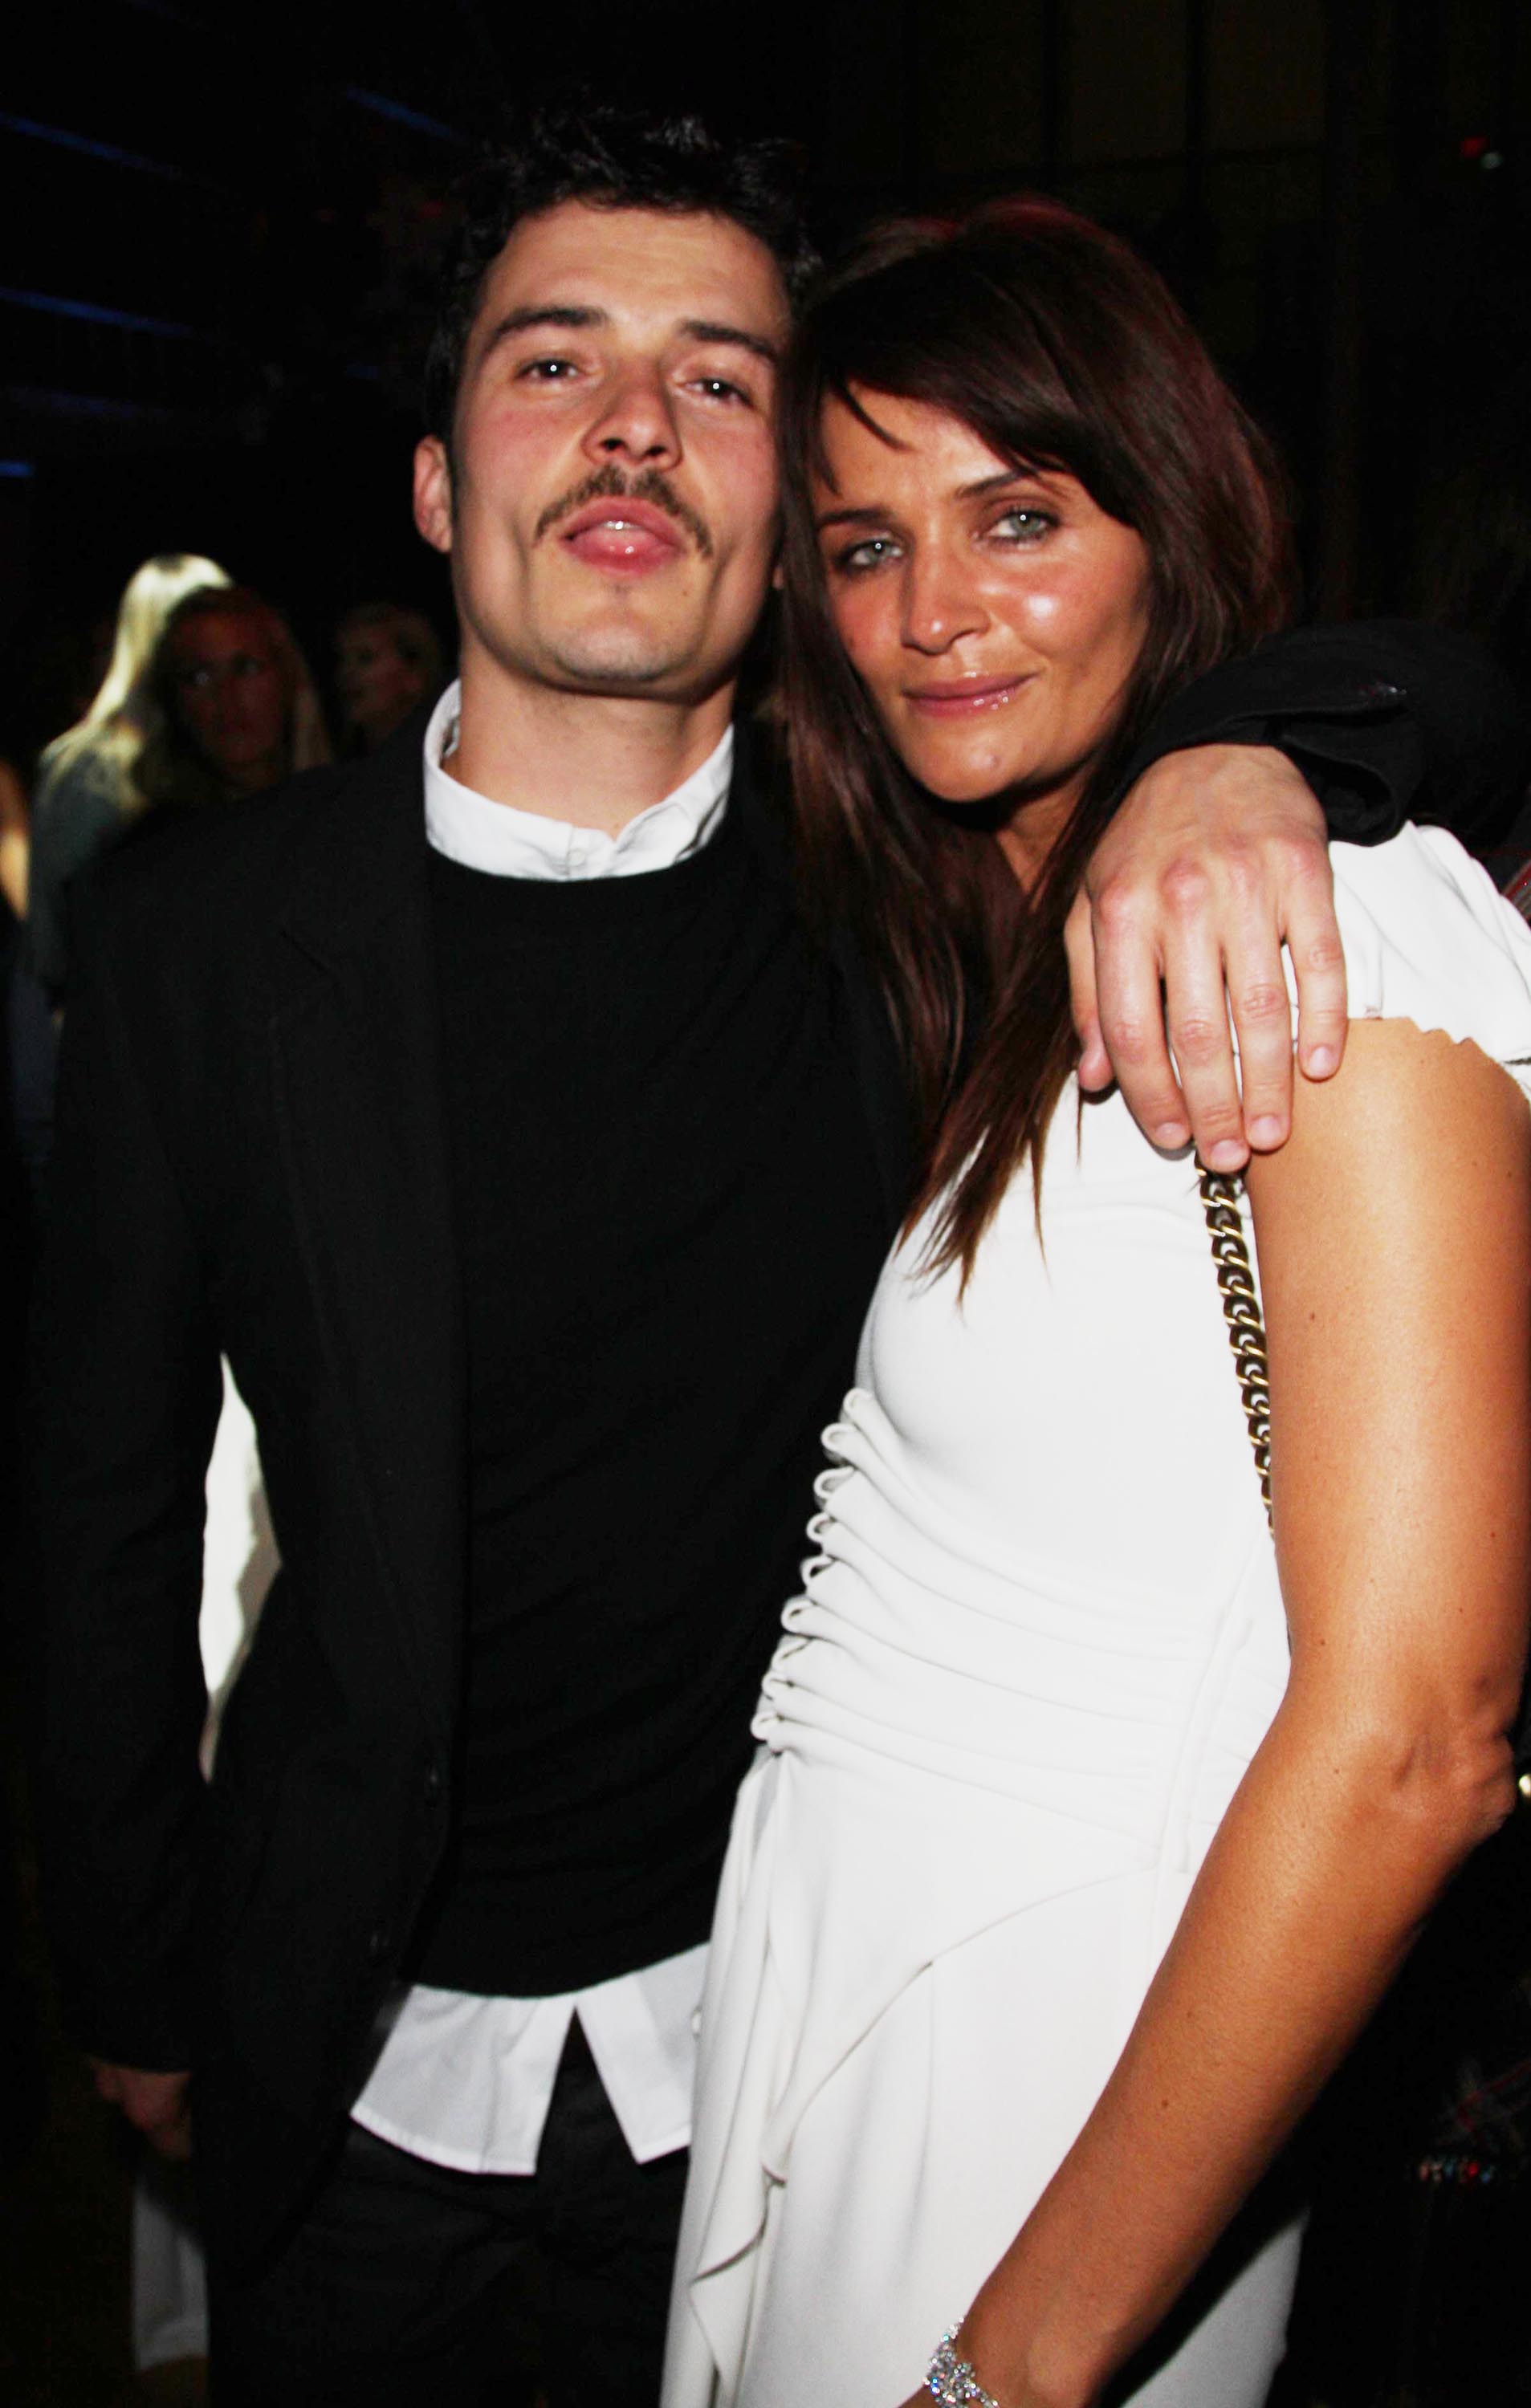 Orlando Bloom and Helena Christensen attend the GQ Men of the Year 10th Anniversary at the Royal Opera House on September 4, 2007, in London. | Source: Getty Images